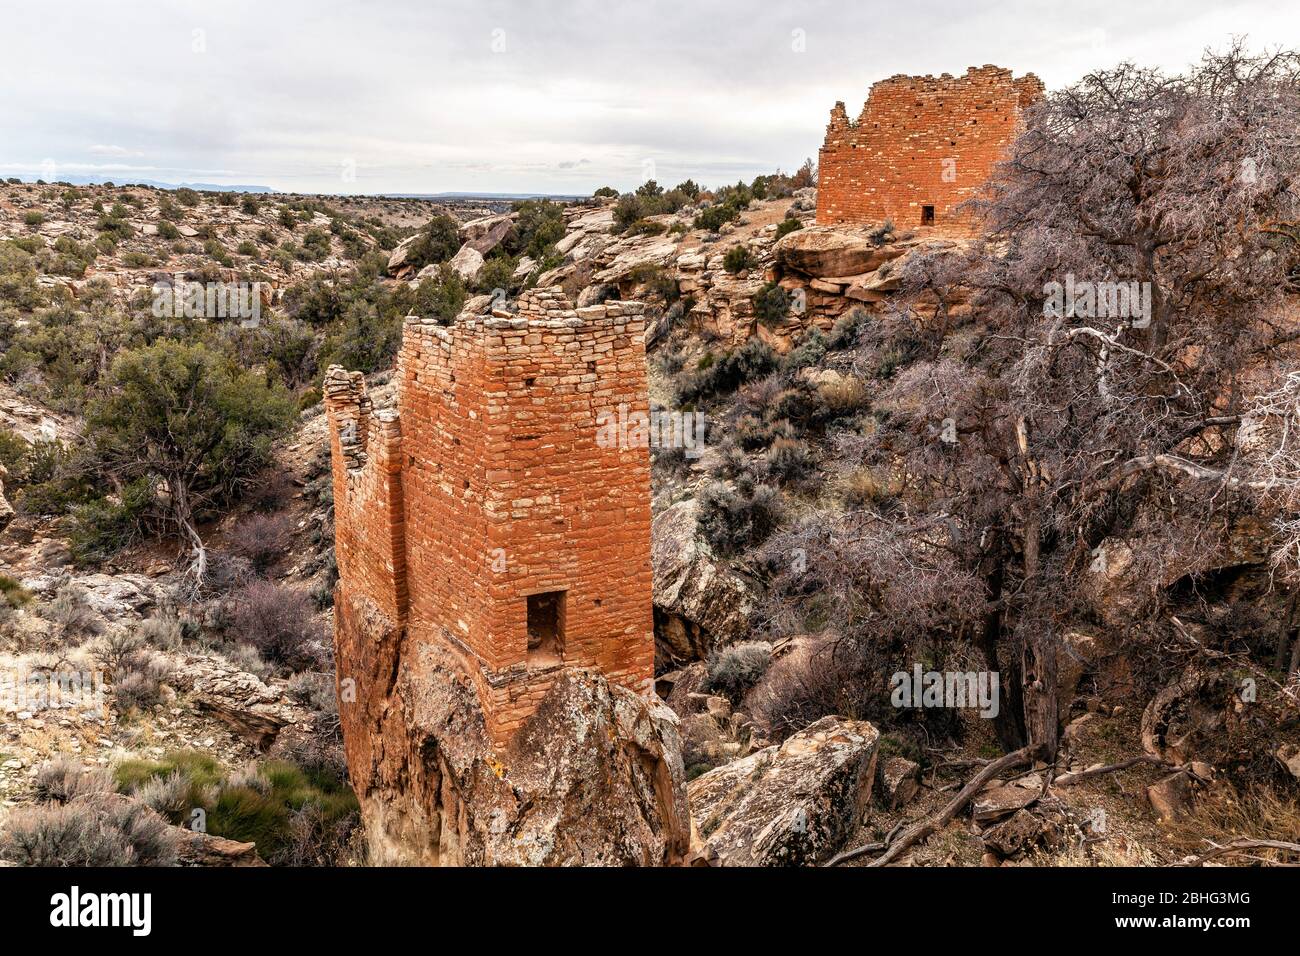 UT00519-00...UTAH/Colorado  - Ancestral Pueblo People structure at The Holly Site in Hovenweep National Monument. Stock Photo